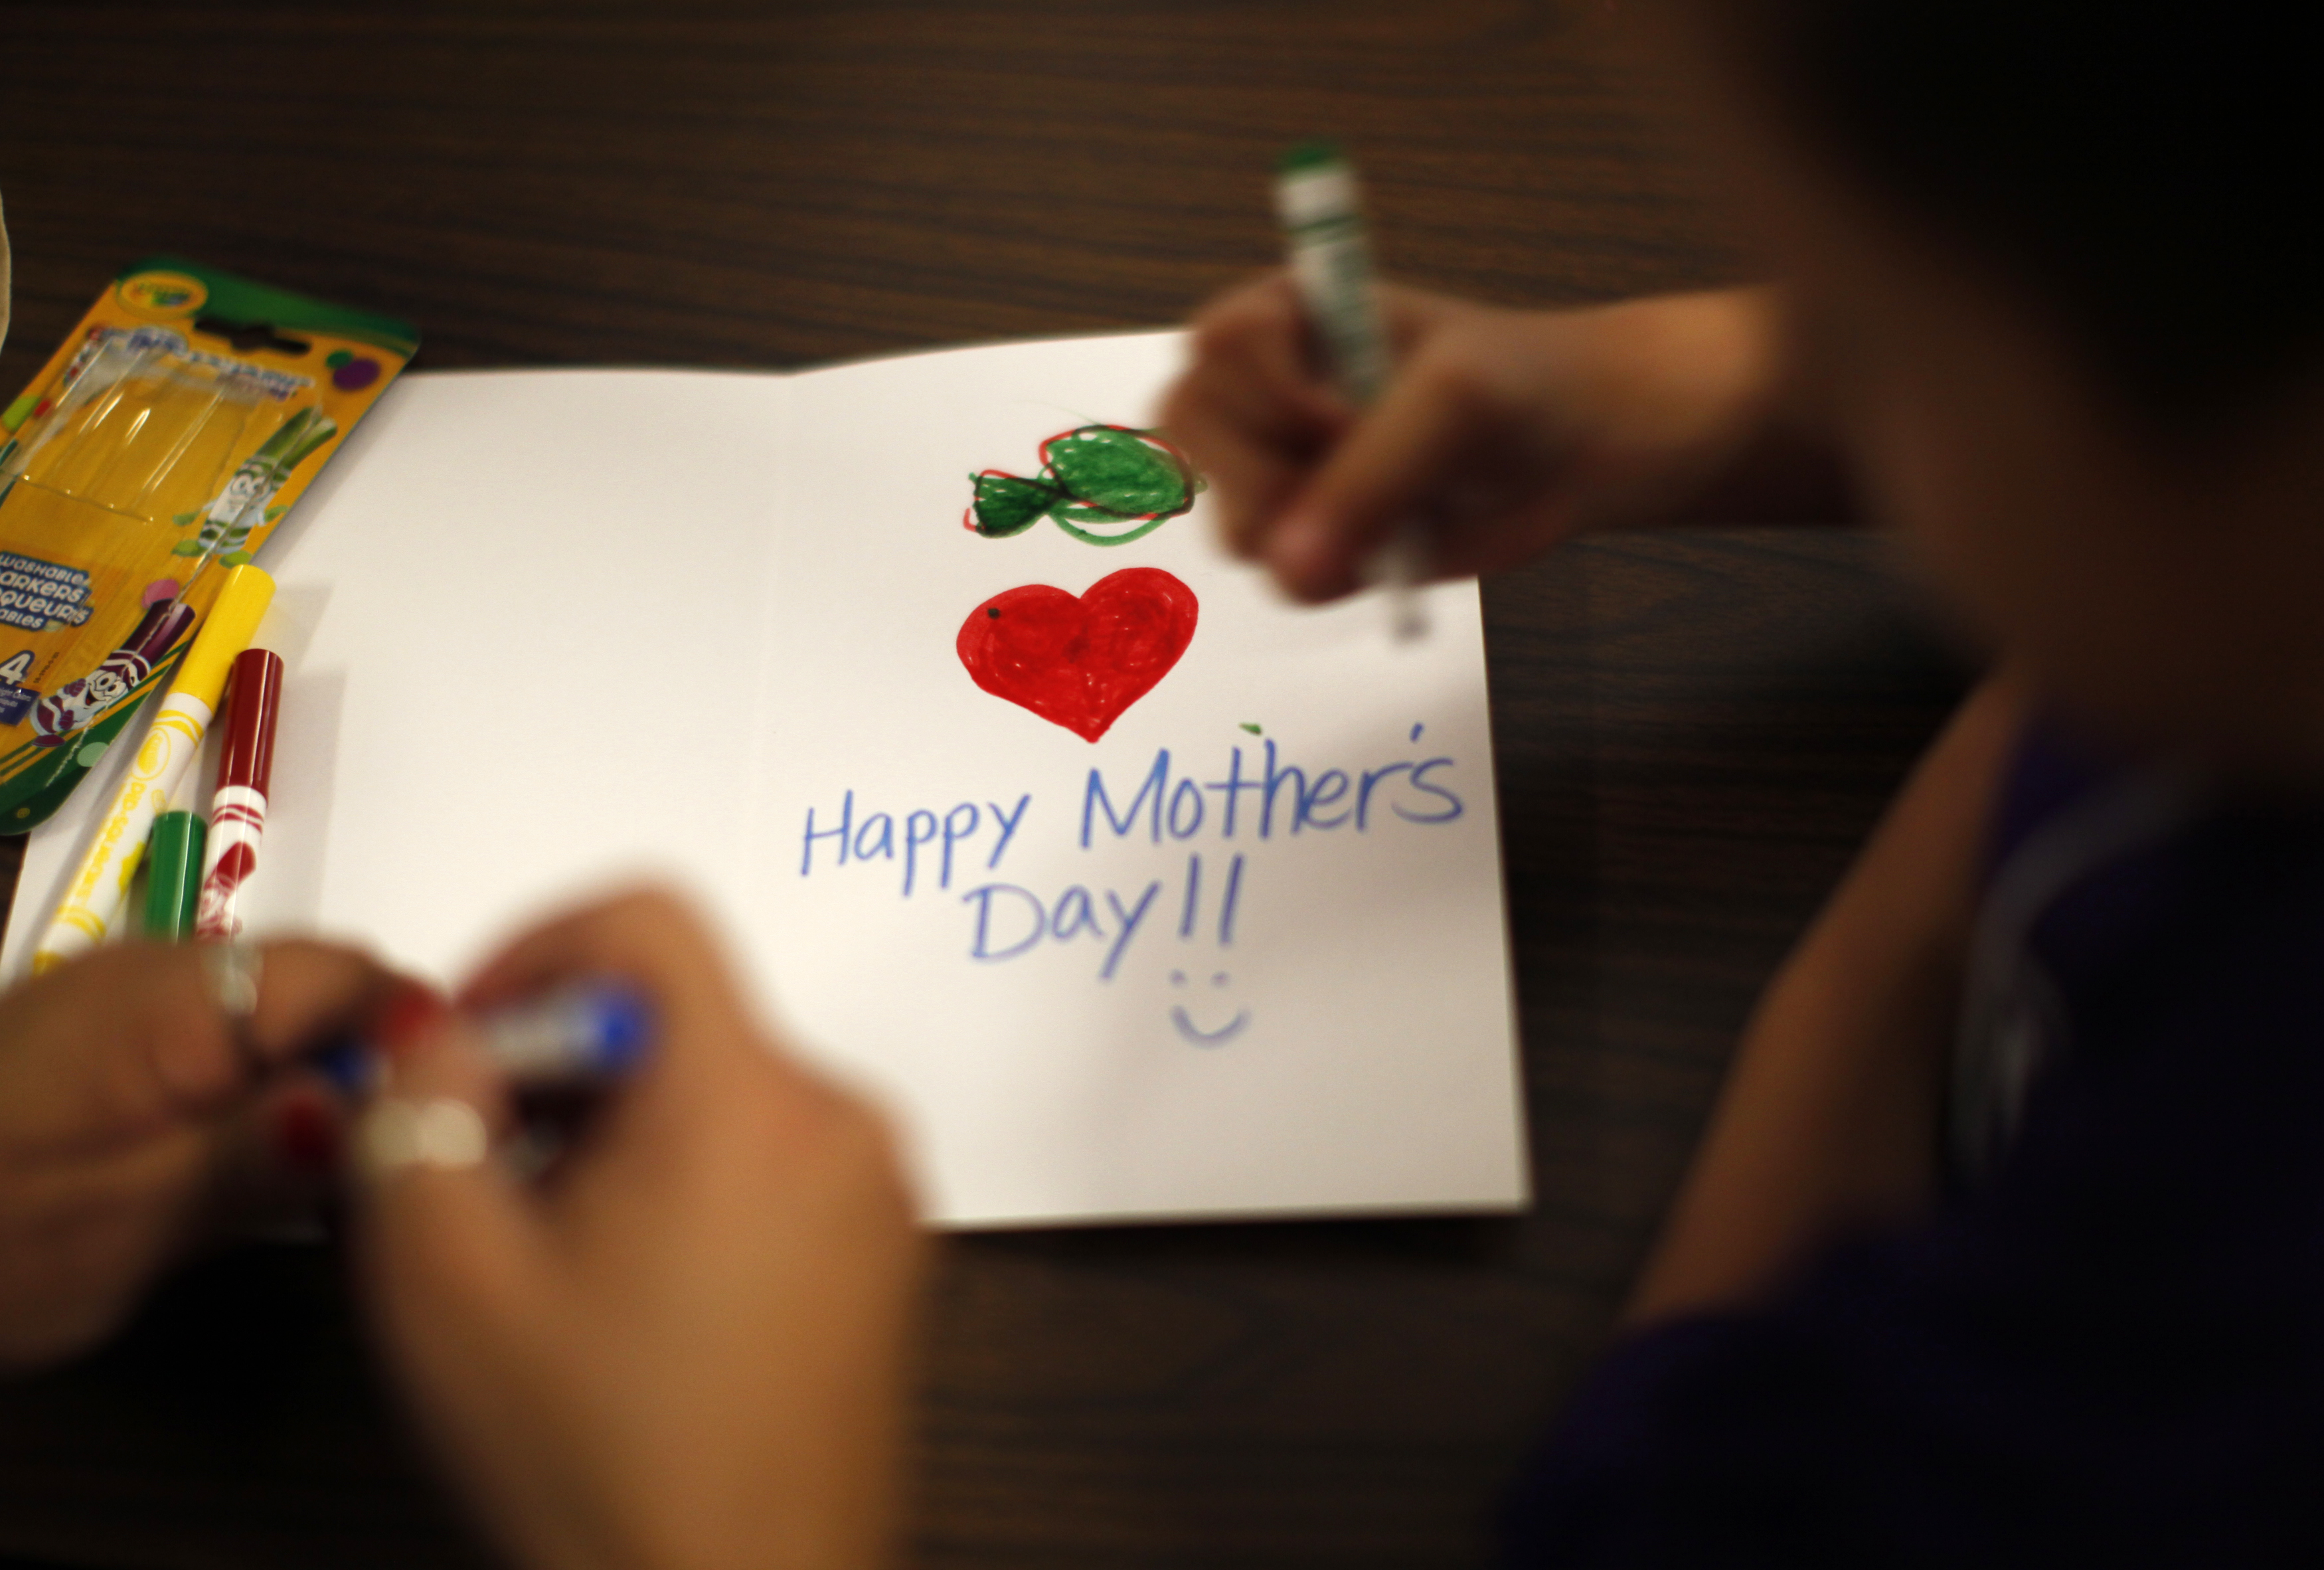 A single day of thanks can be seen as insulting to mothers who sacrifice so much.